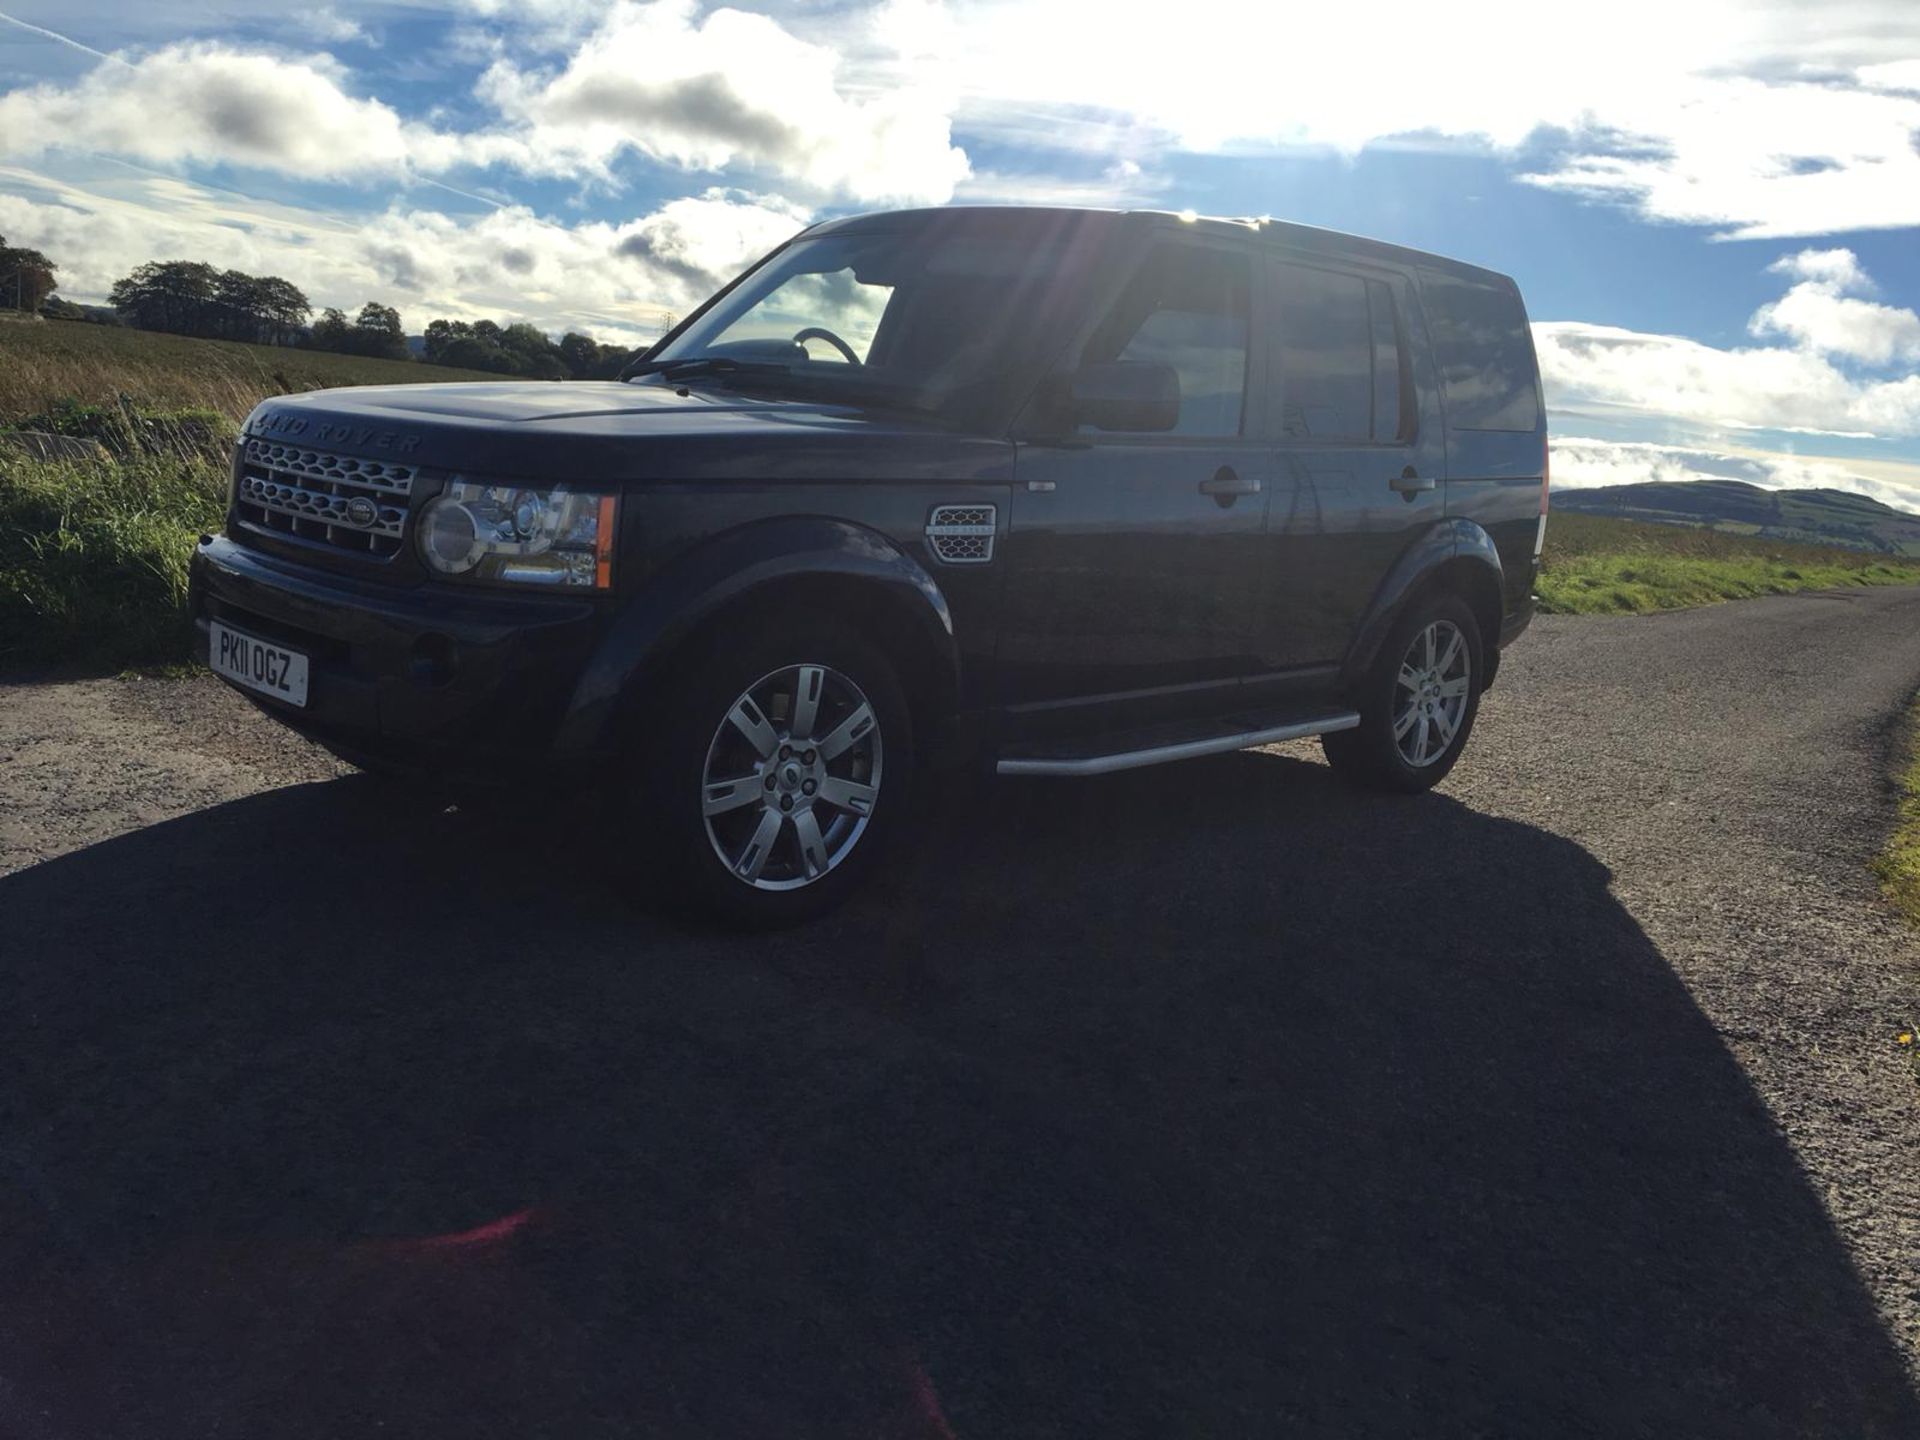 2011/11 REG LAND ROVER DISCOVERY SDV6 AUTOMATIC 245 COMMERCIAL DIESEL 4X4, SHOWING 1 FORMER KEEPER - Image 3 of 9